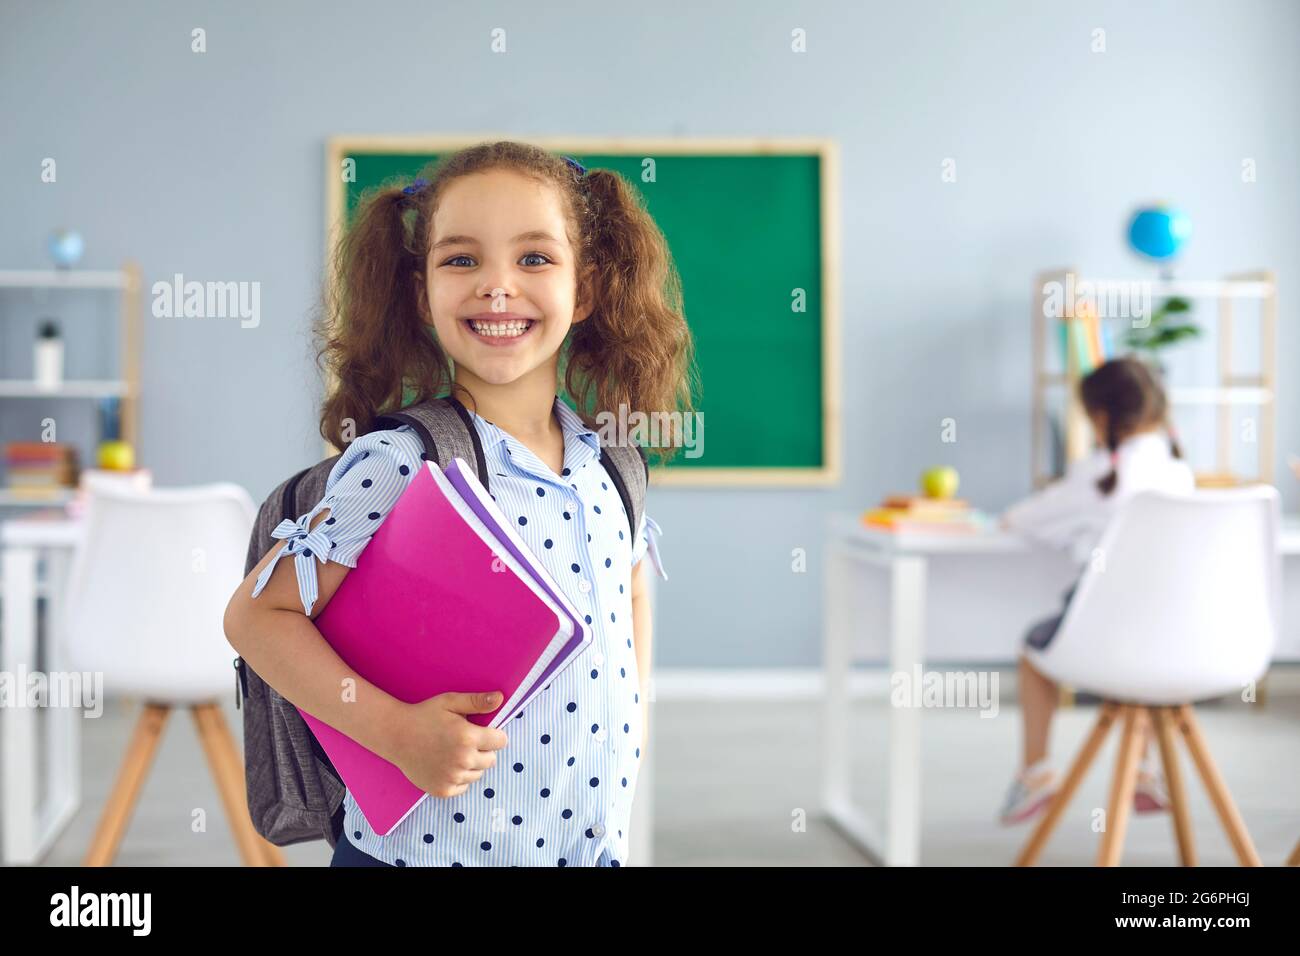 Back to school. Smiling schoolgirl with a book in her hand looks at the camera while standing in class. Stock Photo